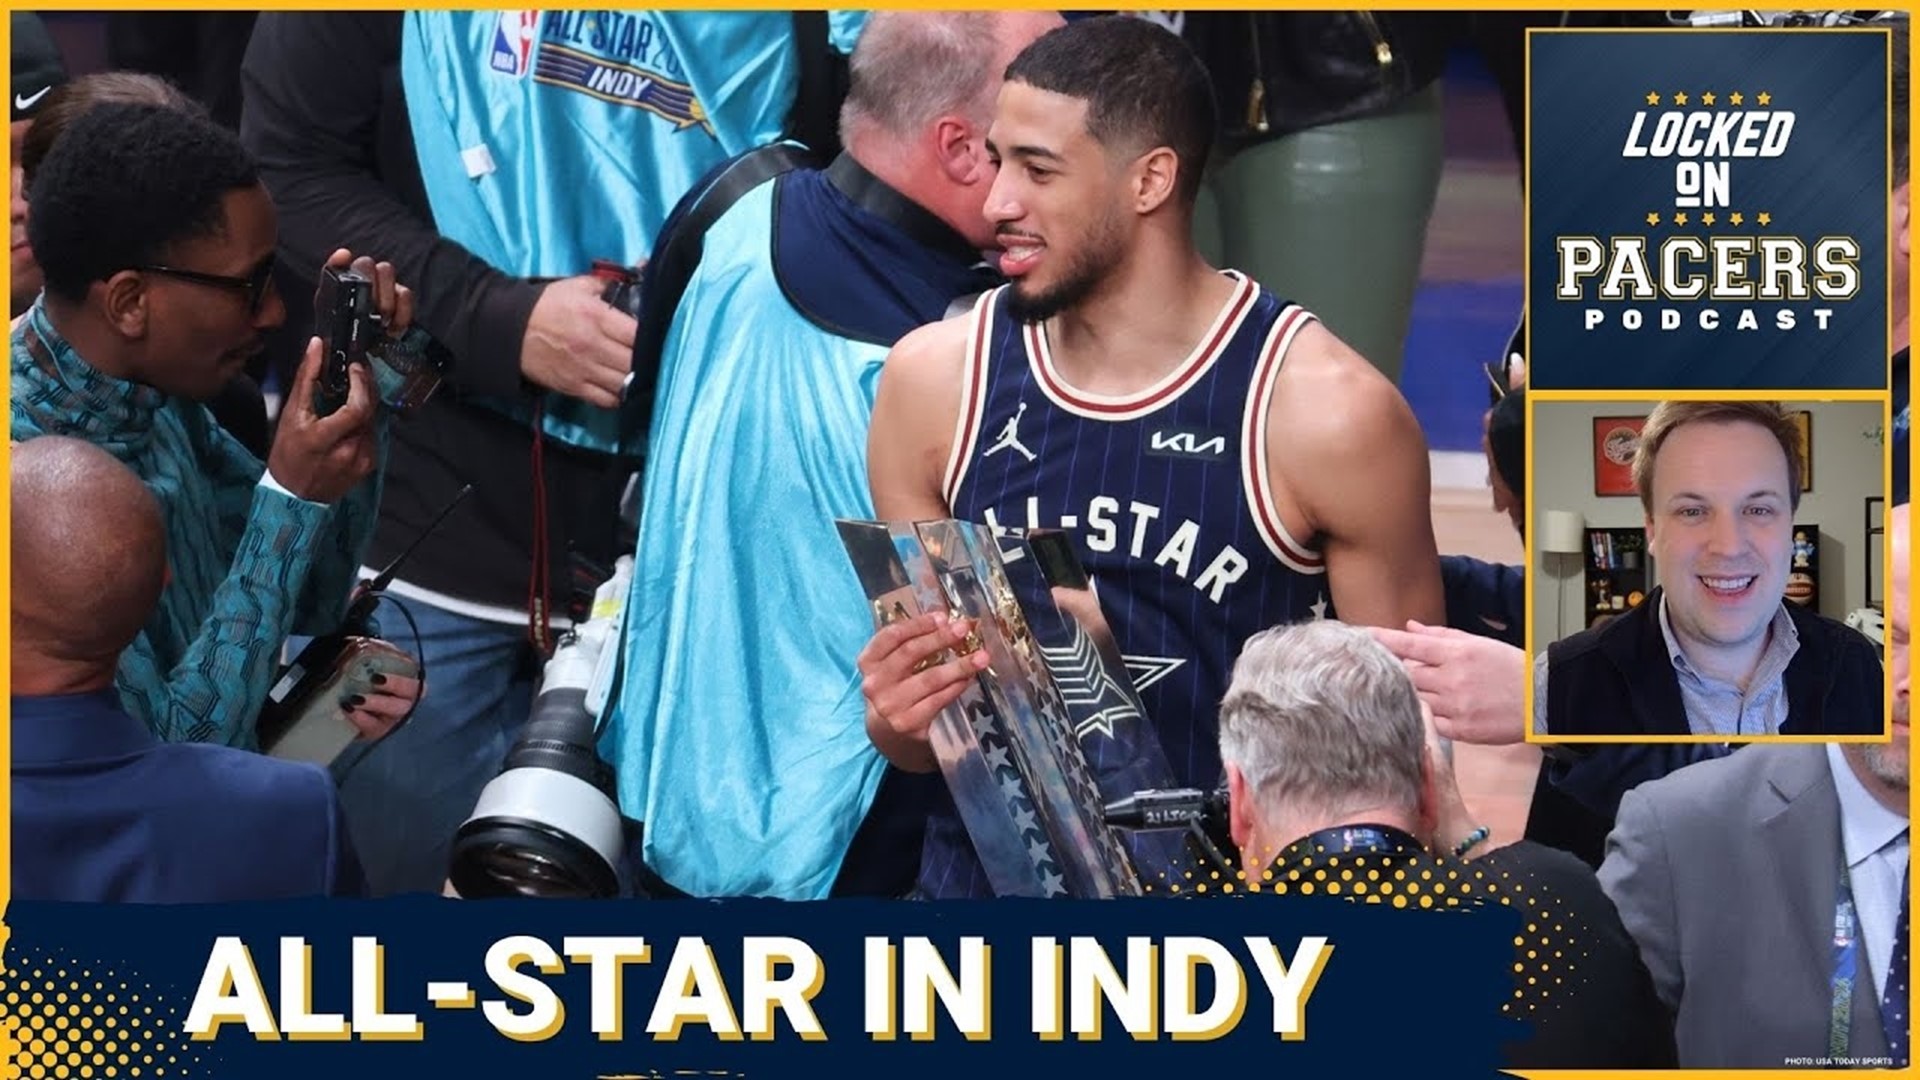 The Indiana Pacers had a quality All-Star weekend with Tyrese Haliburton, Bennedict Mathurin, Myles Turner, and Oscar Tshiebwe winning events in Indianapolis.